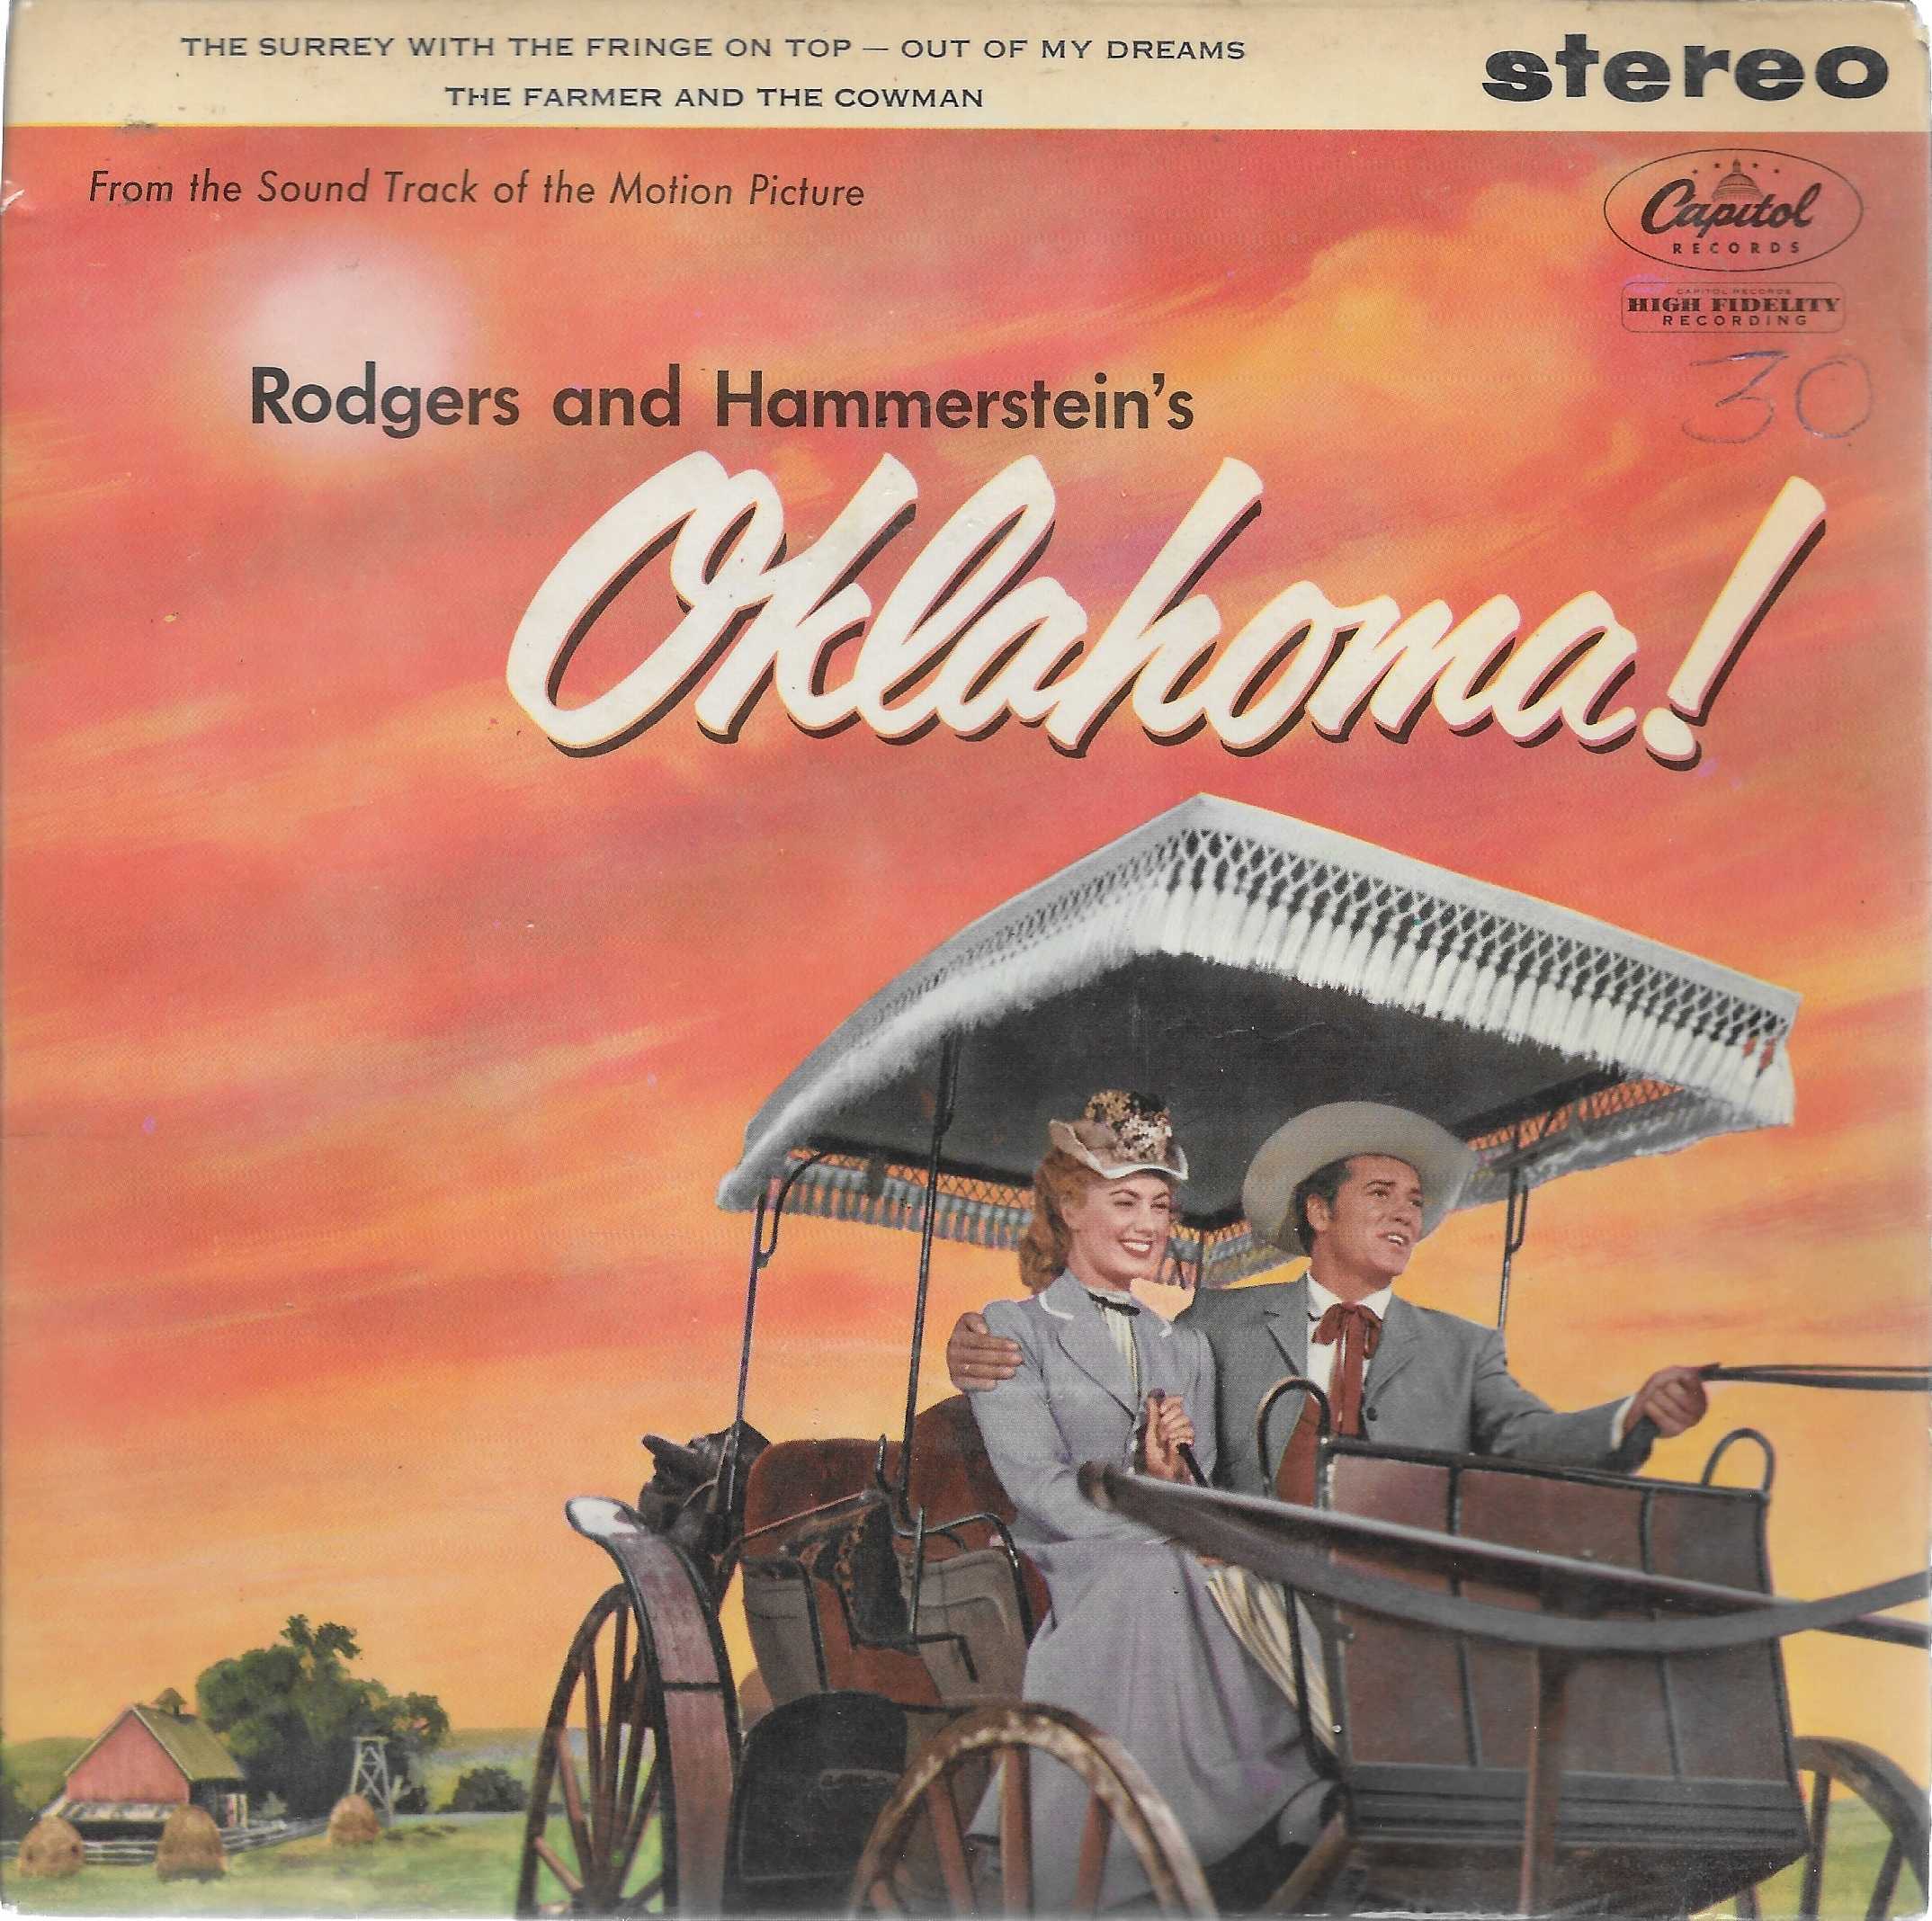 Picture of Oklahoma! 2 by artist Rodgers / Hammerstein II from ITV, Channel 4 and Channel 5 singles library